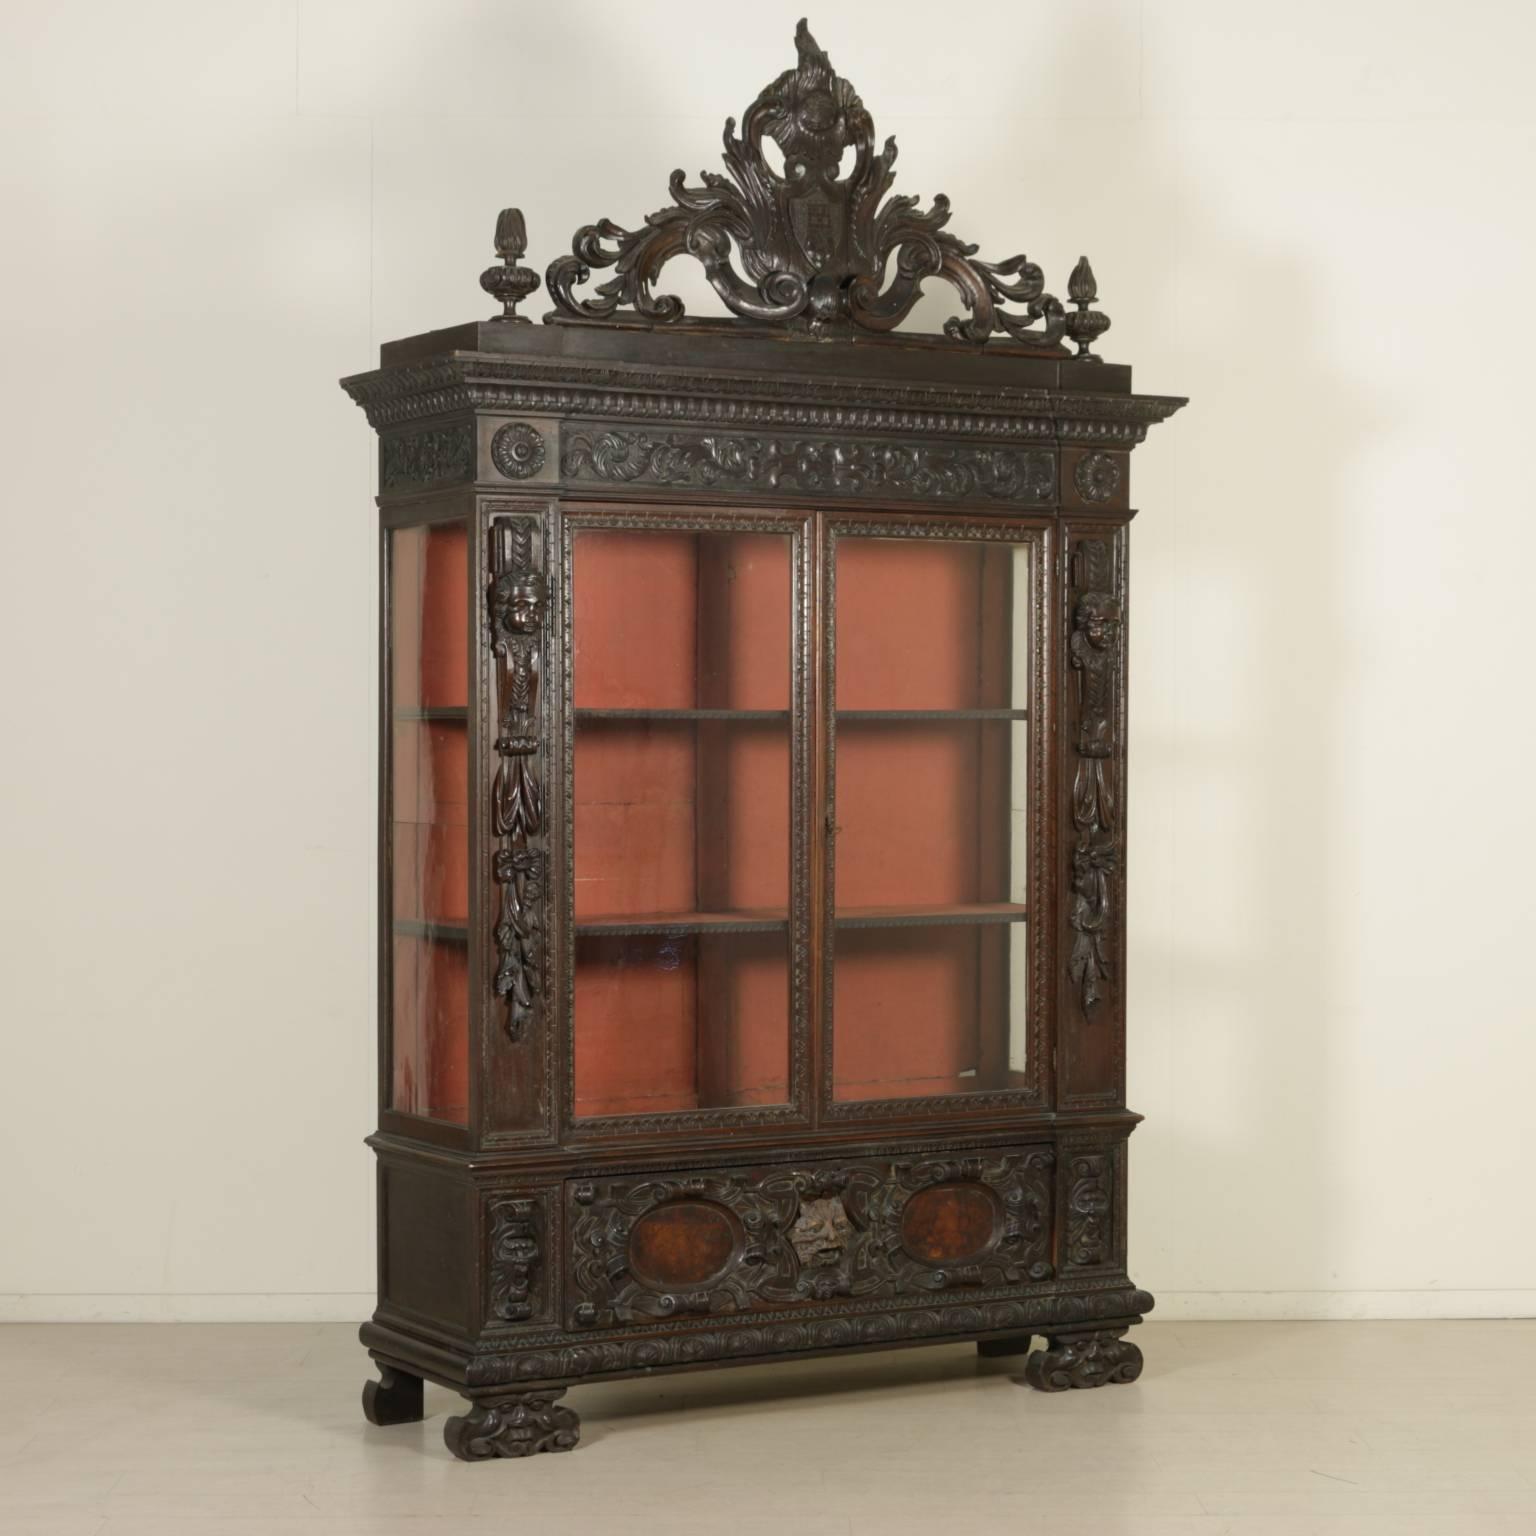 A pair of late 19th century Neo-Renaissance walnut bookcases with different carvings. Composed of various antique wood varieties. Two doors and sides with glasses. Richly carved with masks, pilasters with fruit, crest with coat of arms.